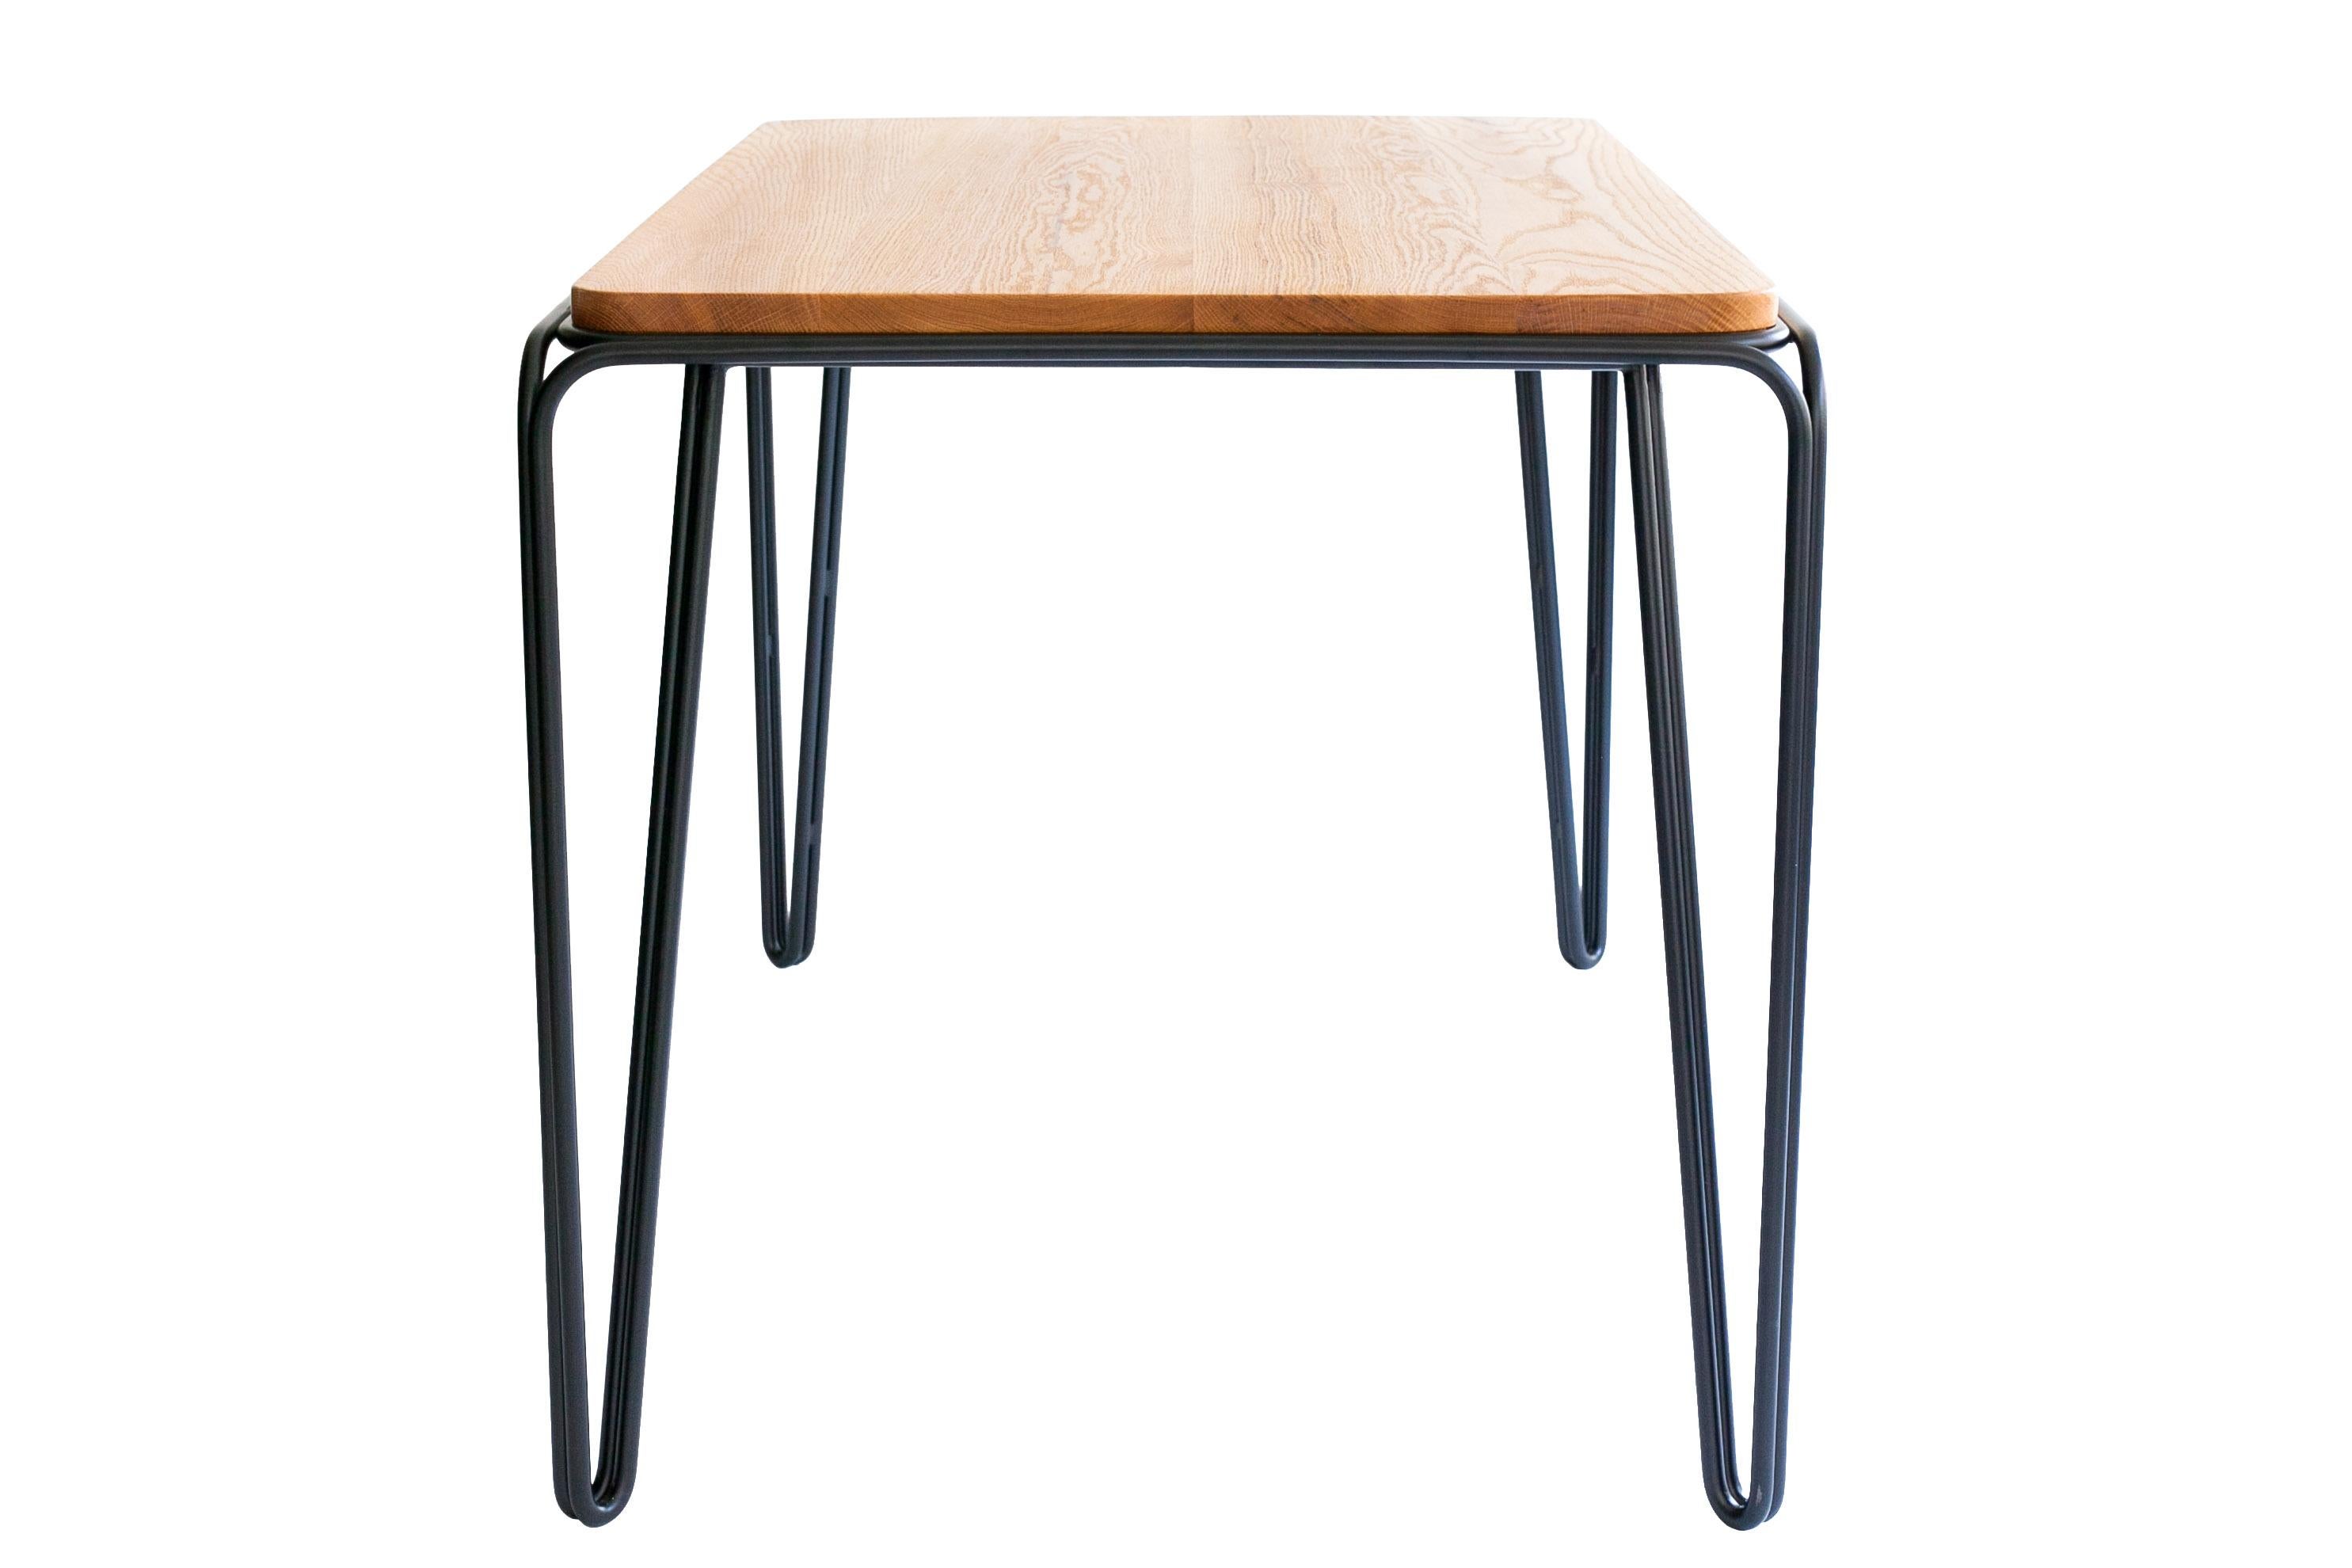 The Wired table features a minimal double wire bent steel frame that support a shaped solid wood top.
The design simplicity is highlighted by angular steel lines and its un-obstructing steel frame.
The Wired table works in small and larges spaces.